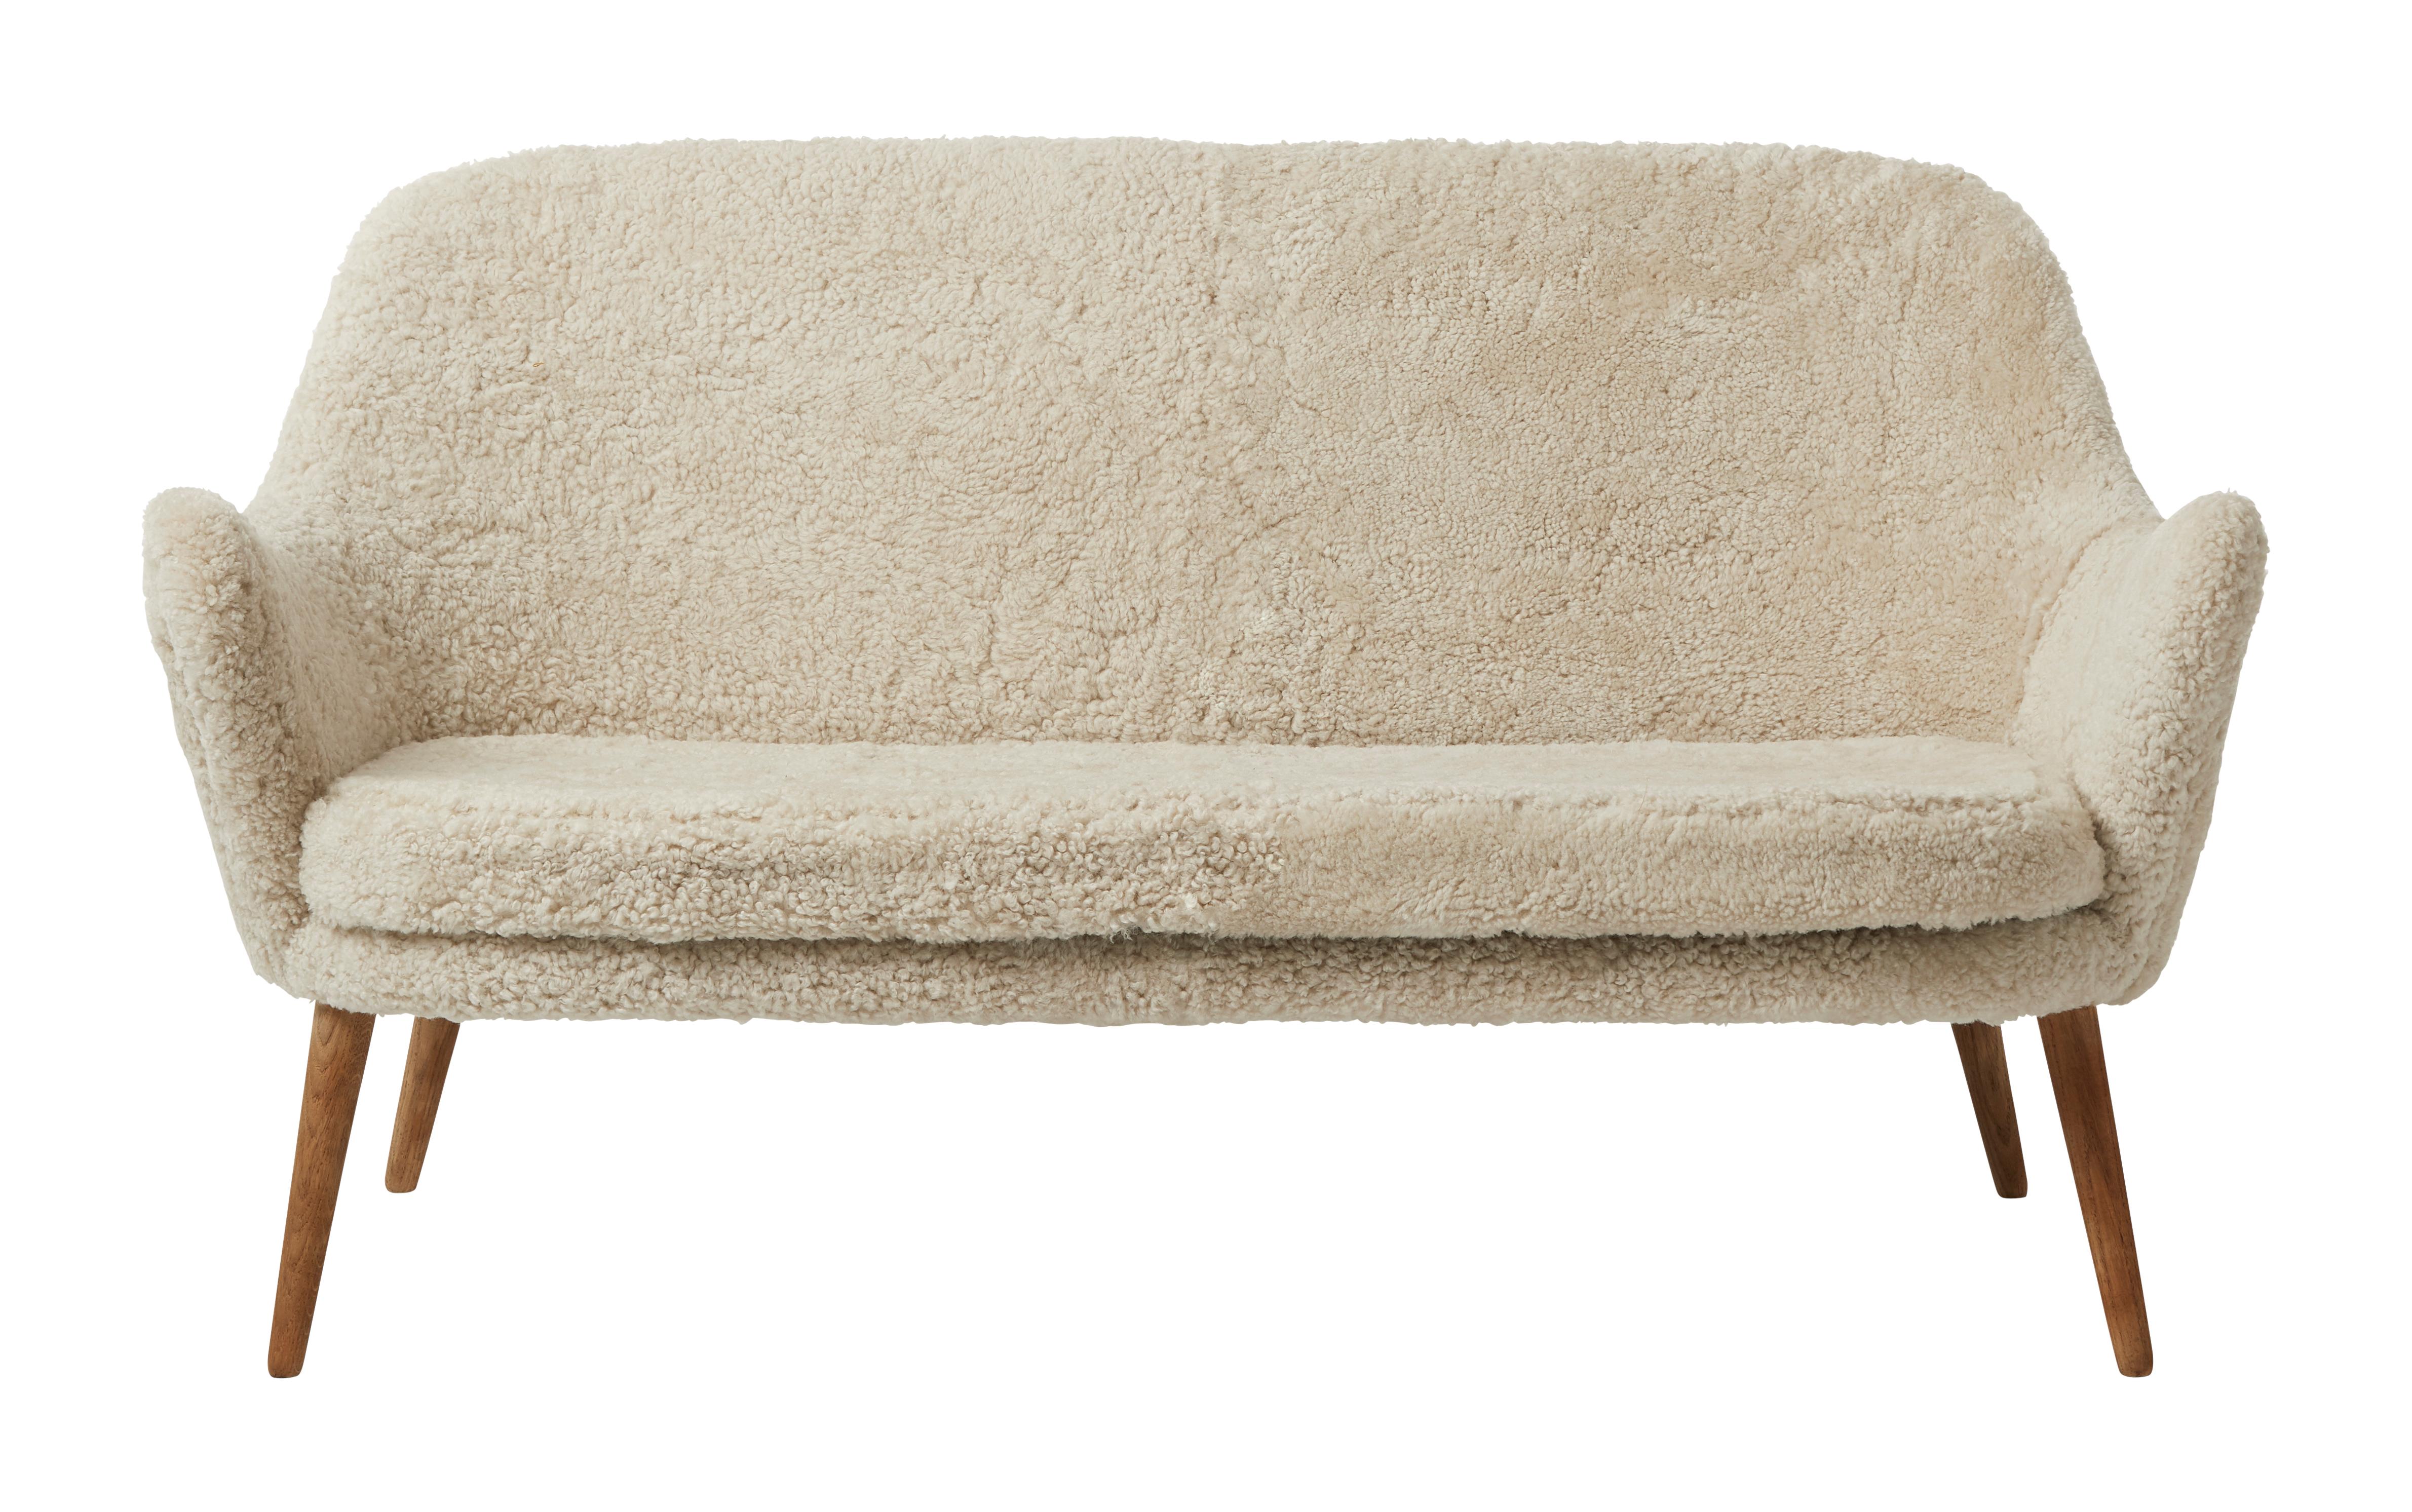 En vente : White (Sheepskin Moonlight) Canapé 2 places Dwellings, by Hans Olsen from Warm Nordic